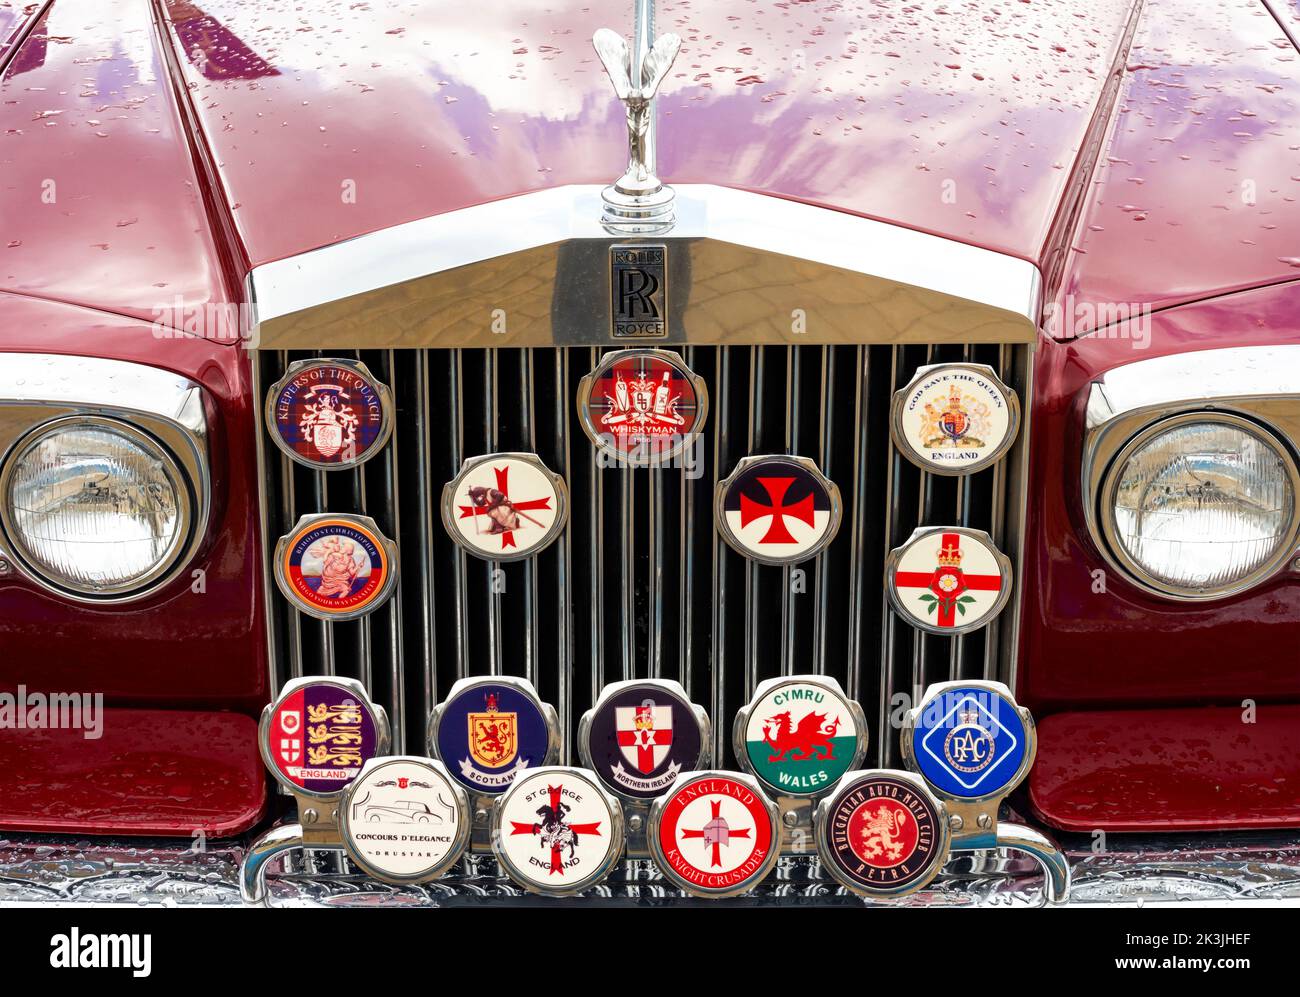 Classic Rolls Royce front radiator grille with variety of British badges Stock Photo